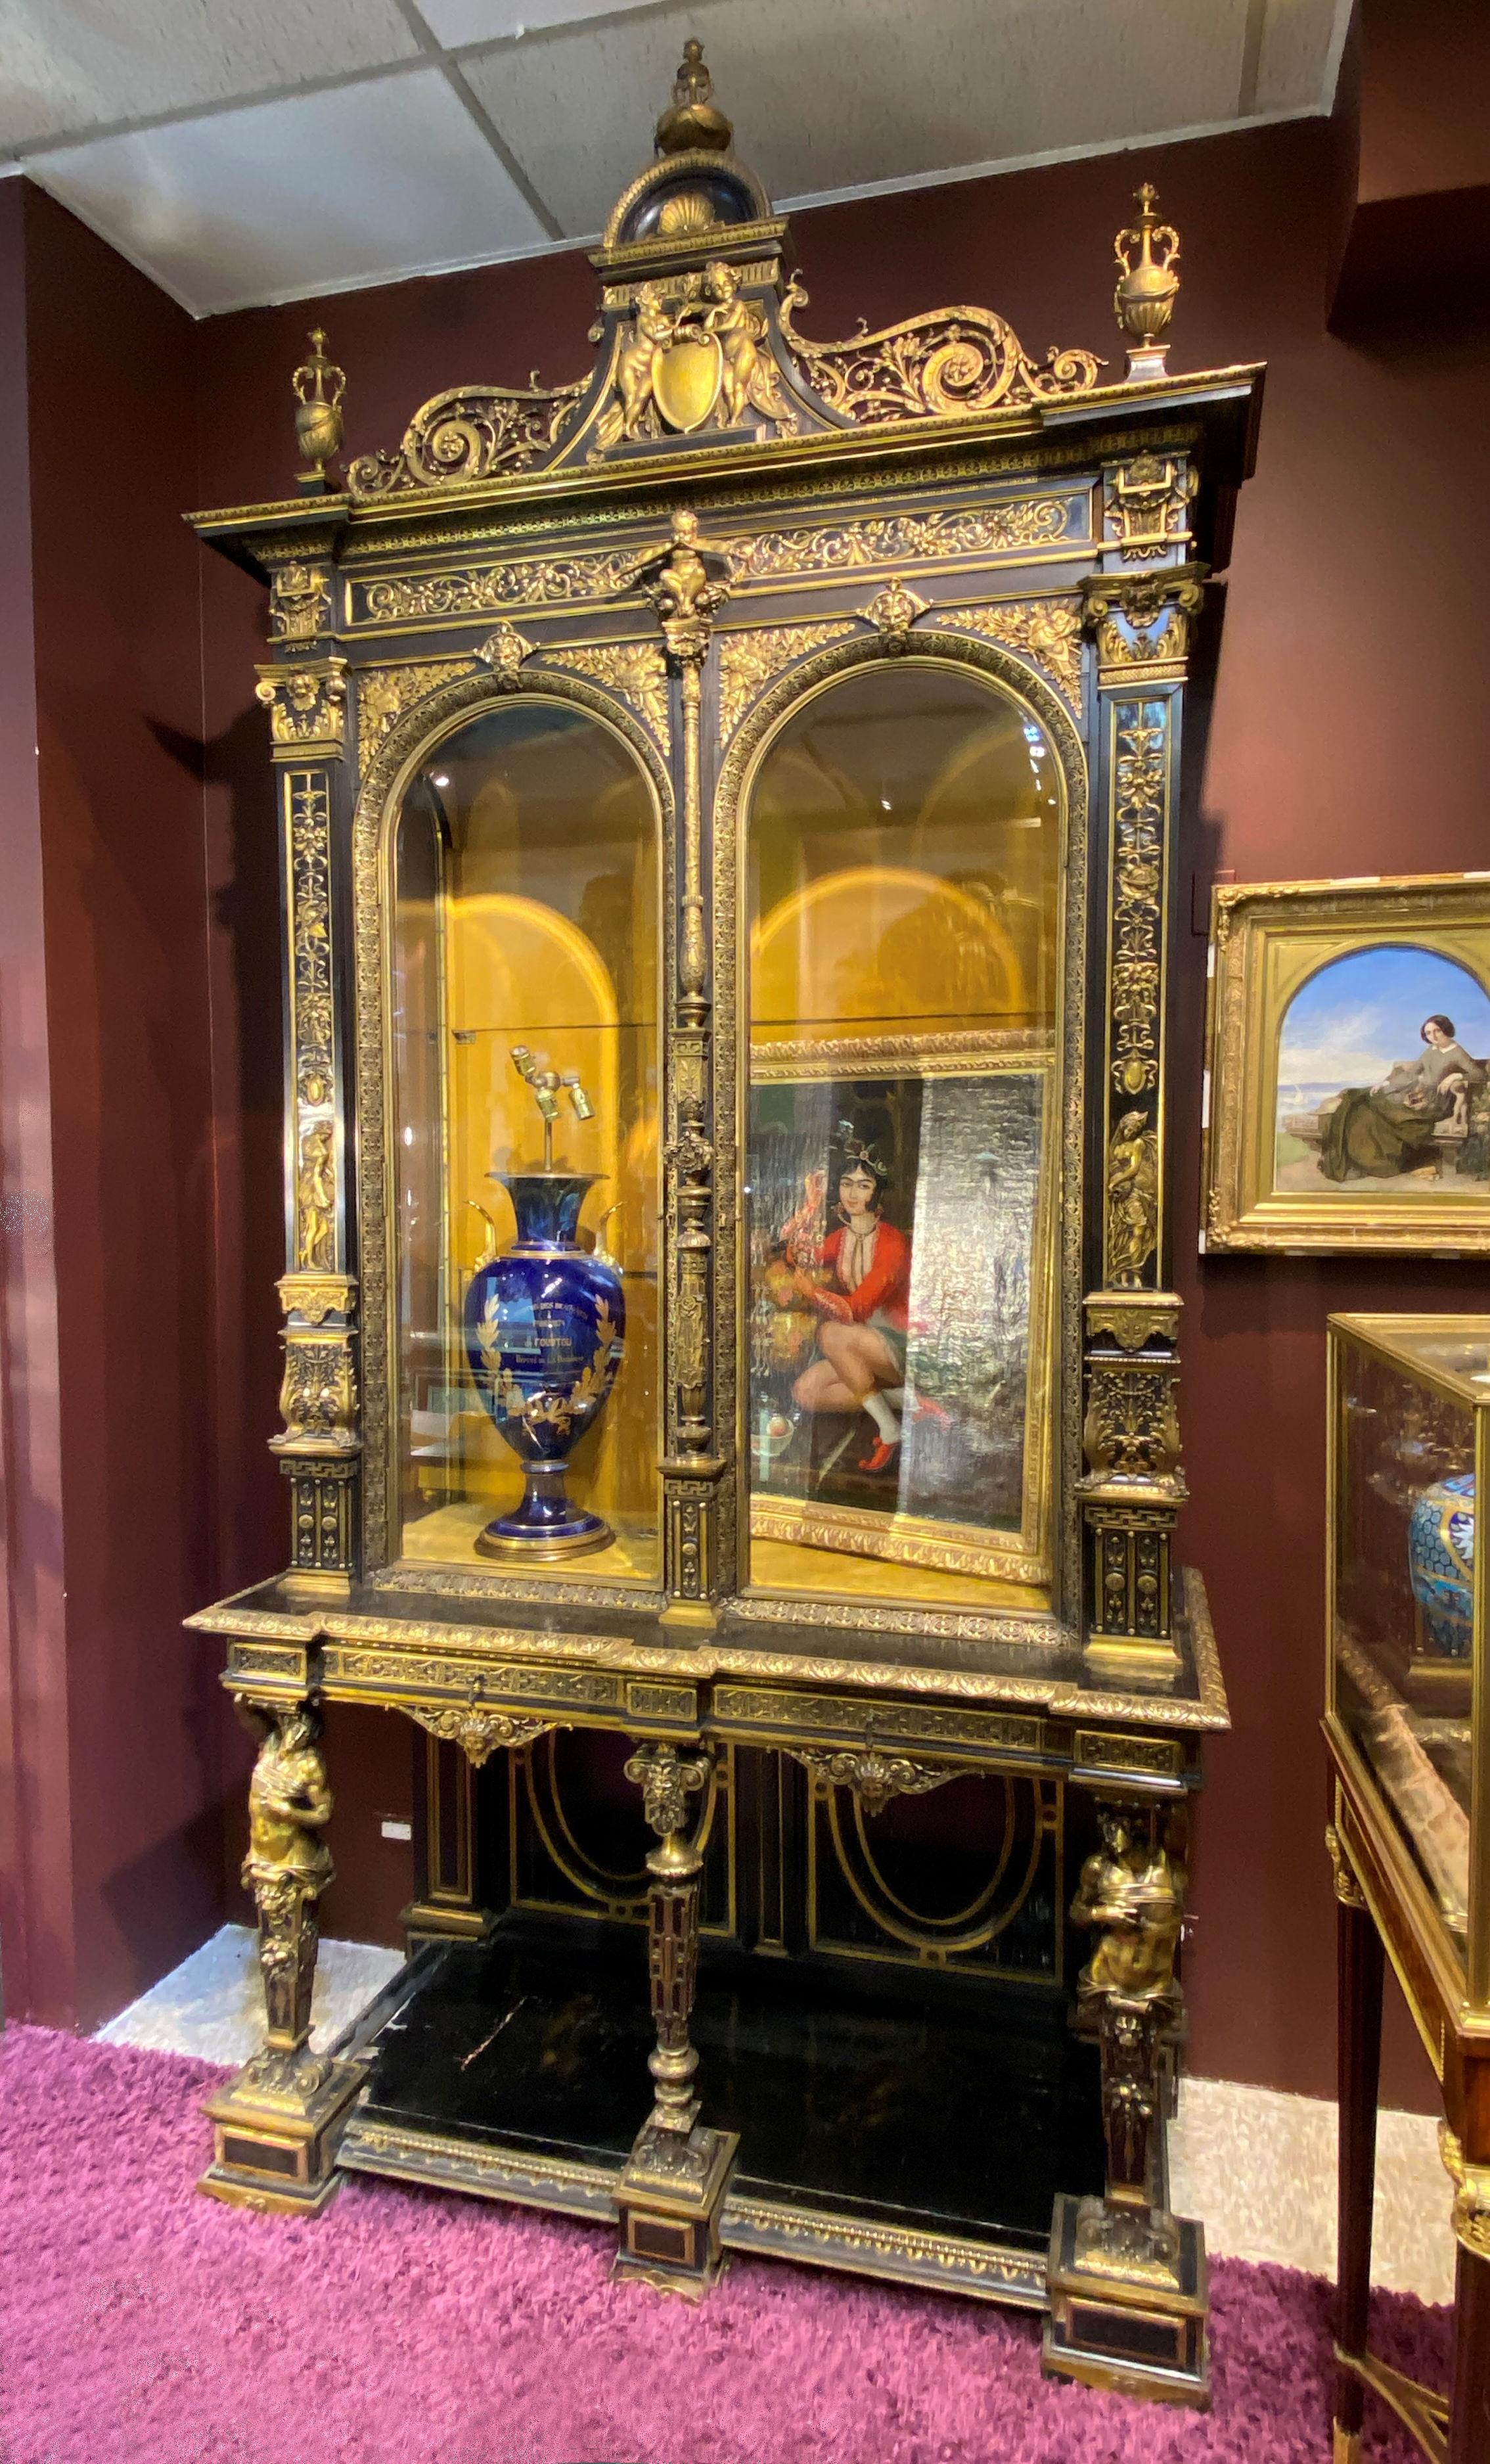 Our monumental ebonized cabinet with gilt bronze mounts, designed by Louis-Constant Sevin (1821-1888) for Barbedienne, is believed to be one of a handful of its kind. The original with silver-gilt mounts debuted at the International Exhibition of